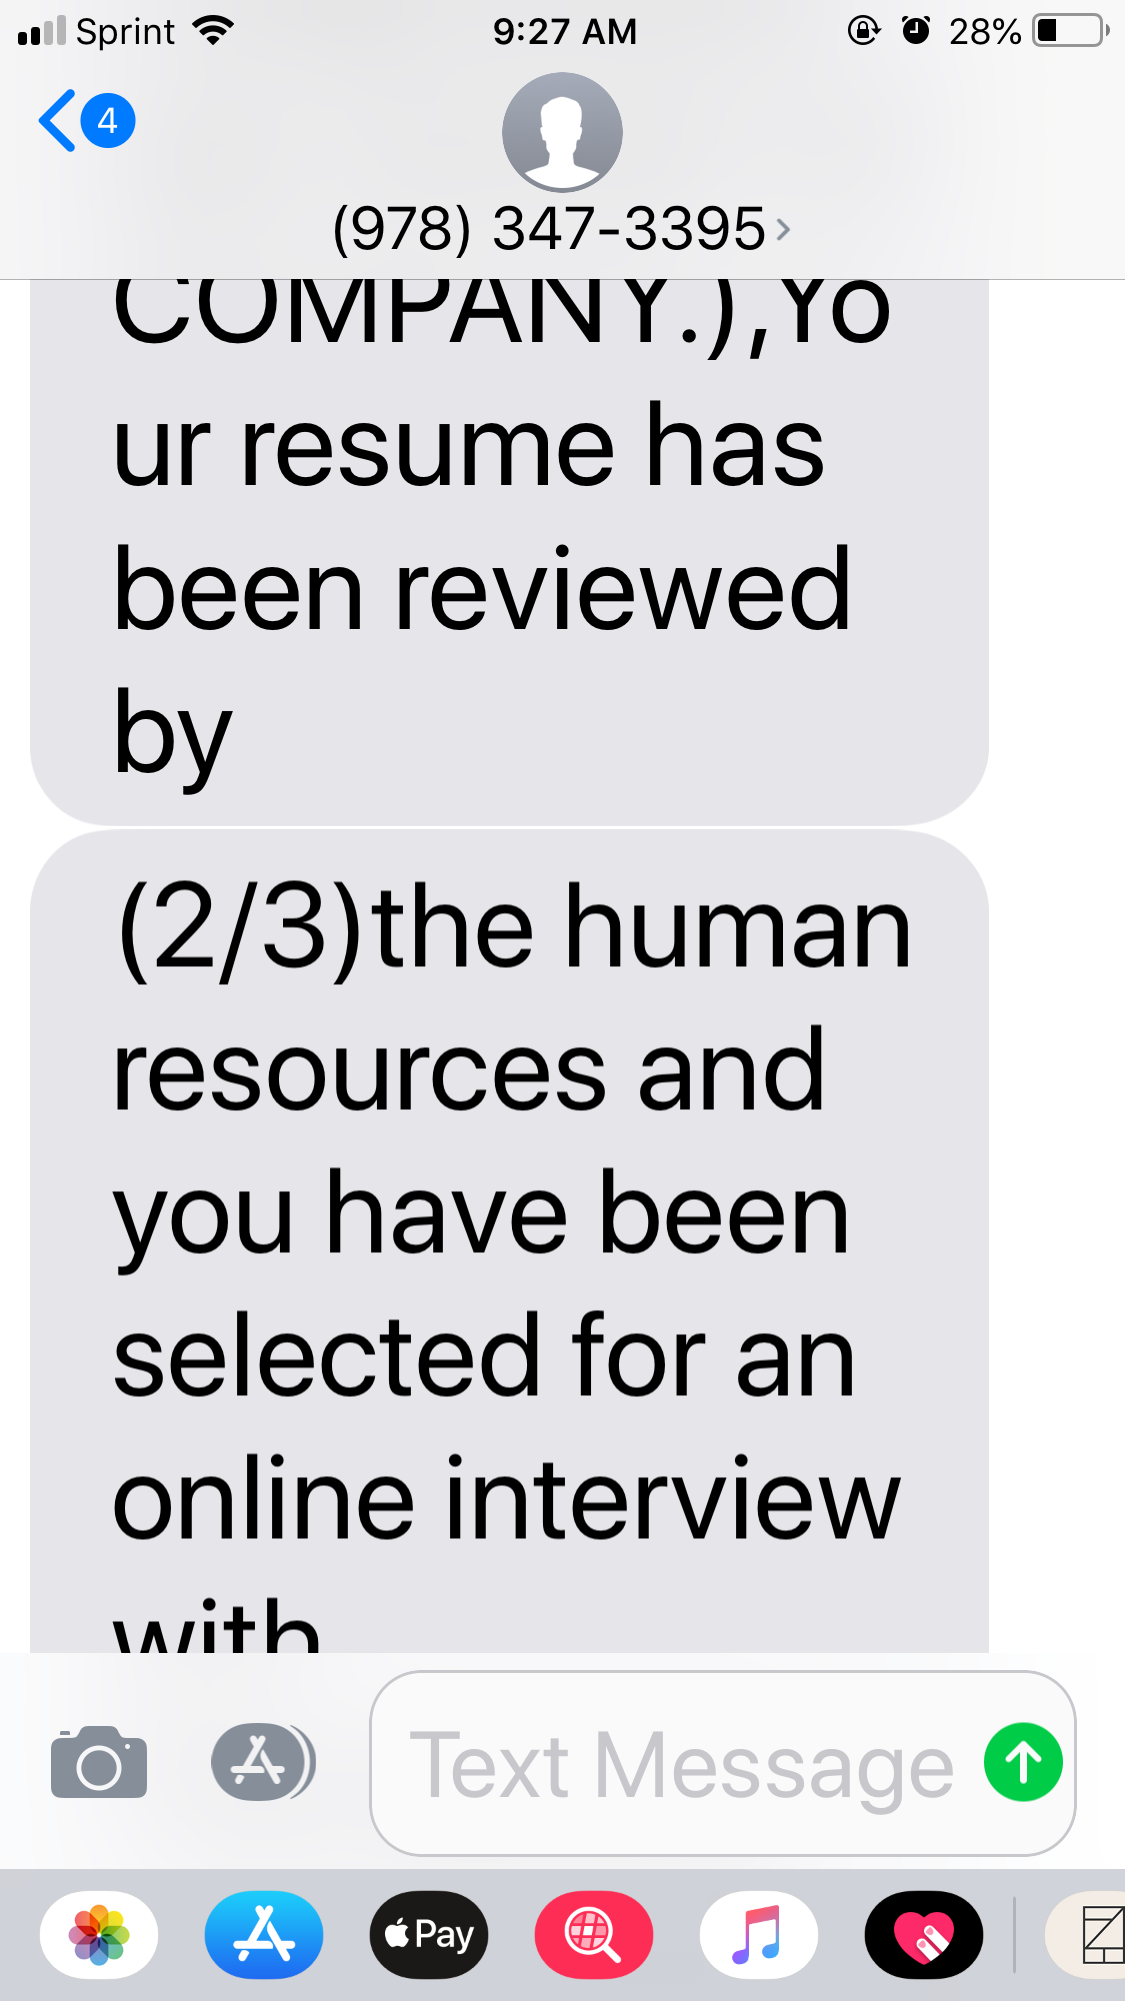 text exchange from job scam